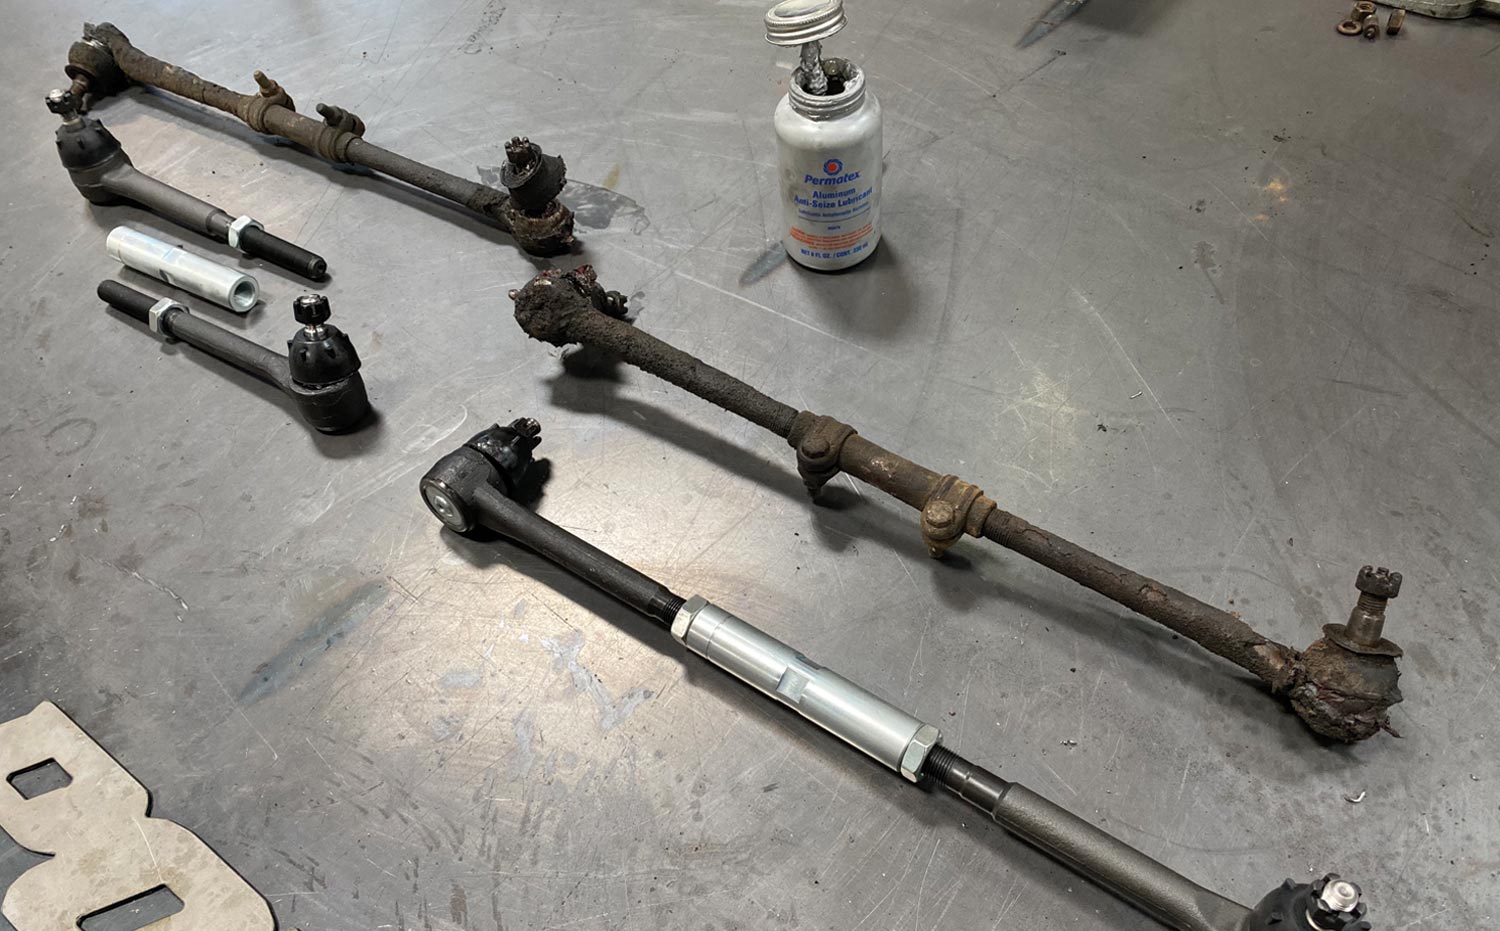 the new and original tie-rod ends sit side by side on a table top